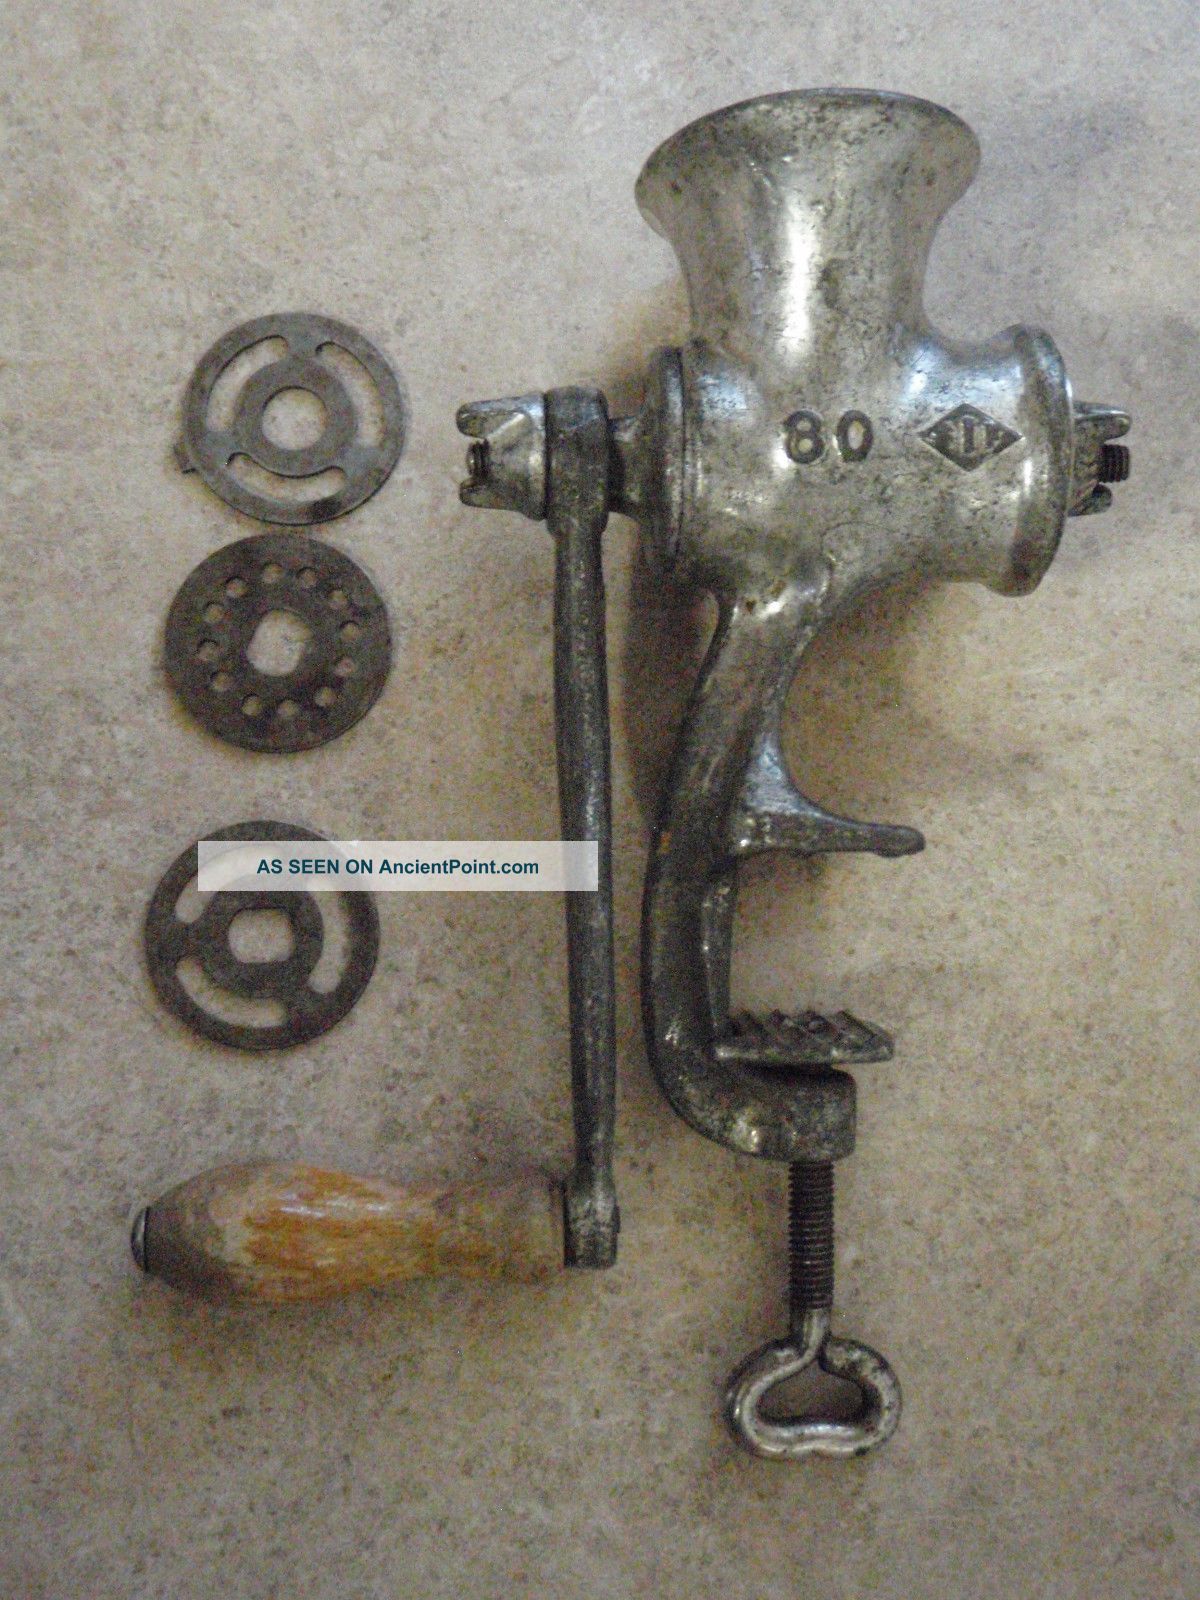 Antique Meat Grinder Hand Crank Cast Iron England 80 1f 4 Cutters Sausage Small Meat Grinders photo